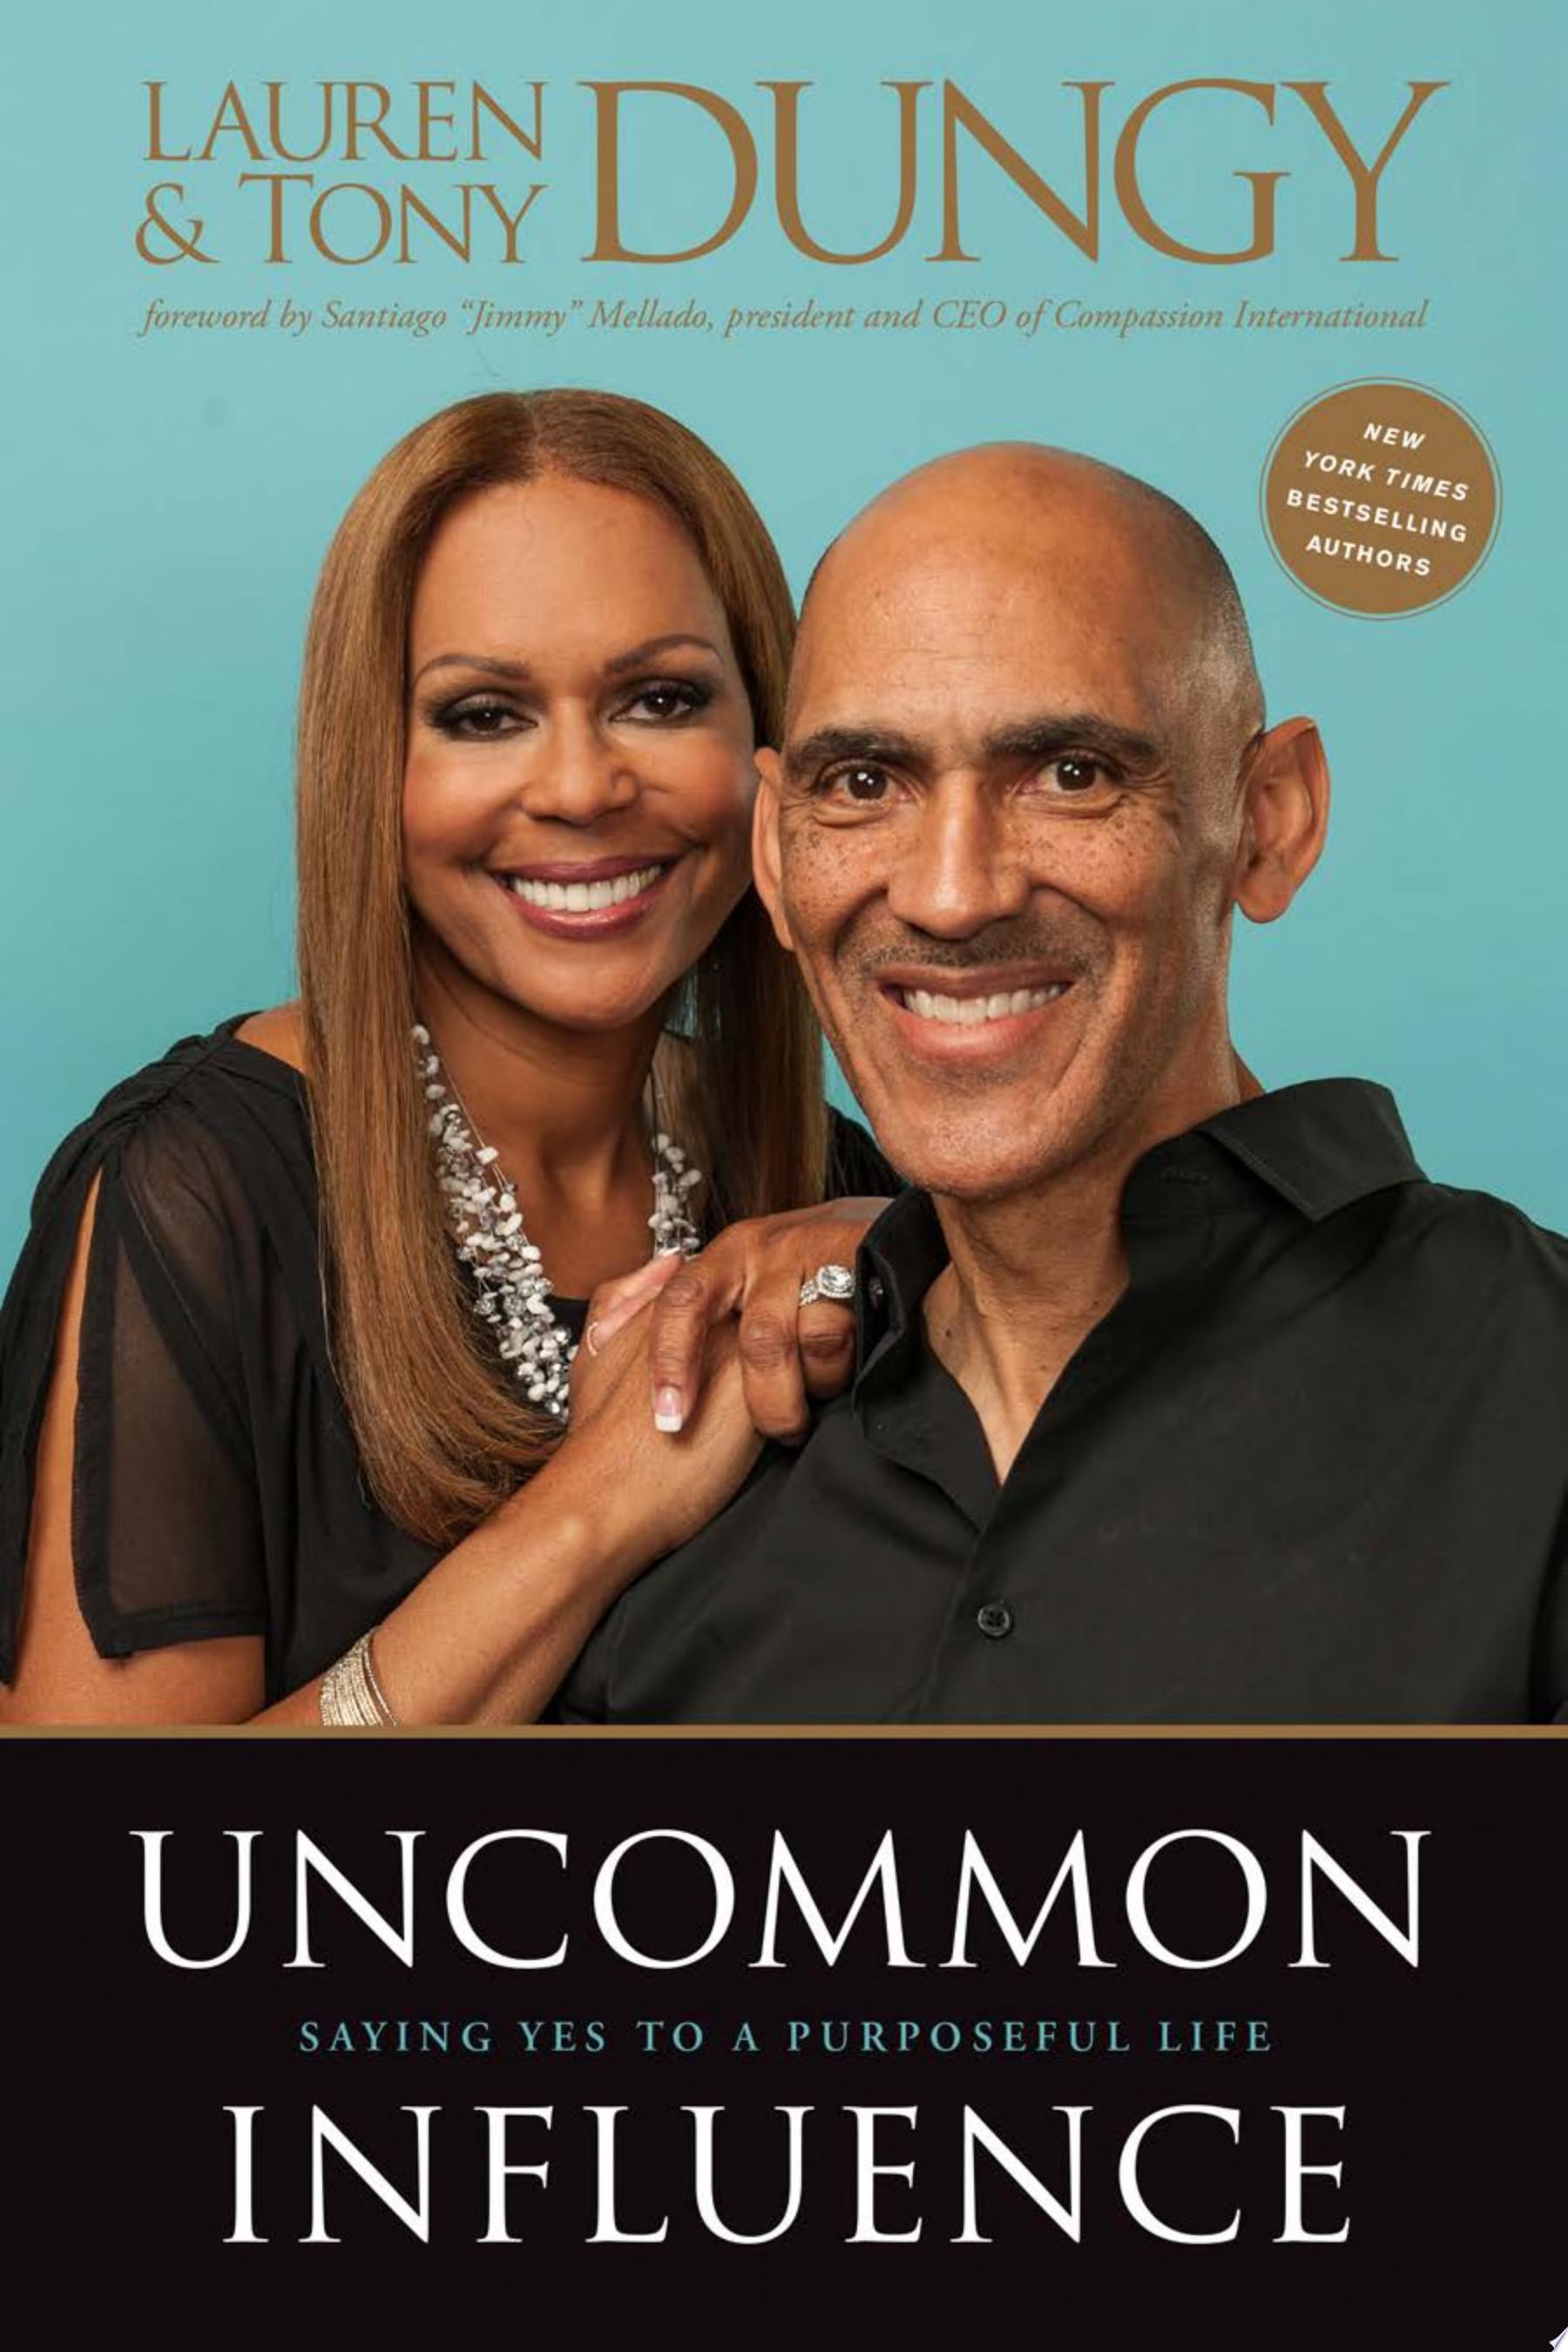 Image for "Uncommon Influence"